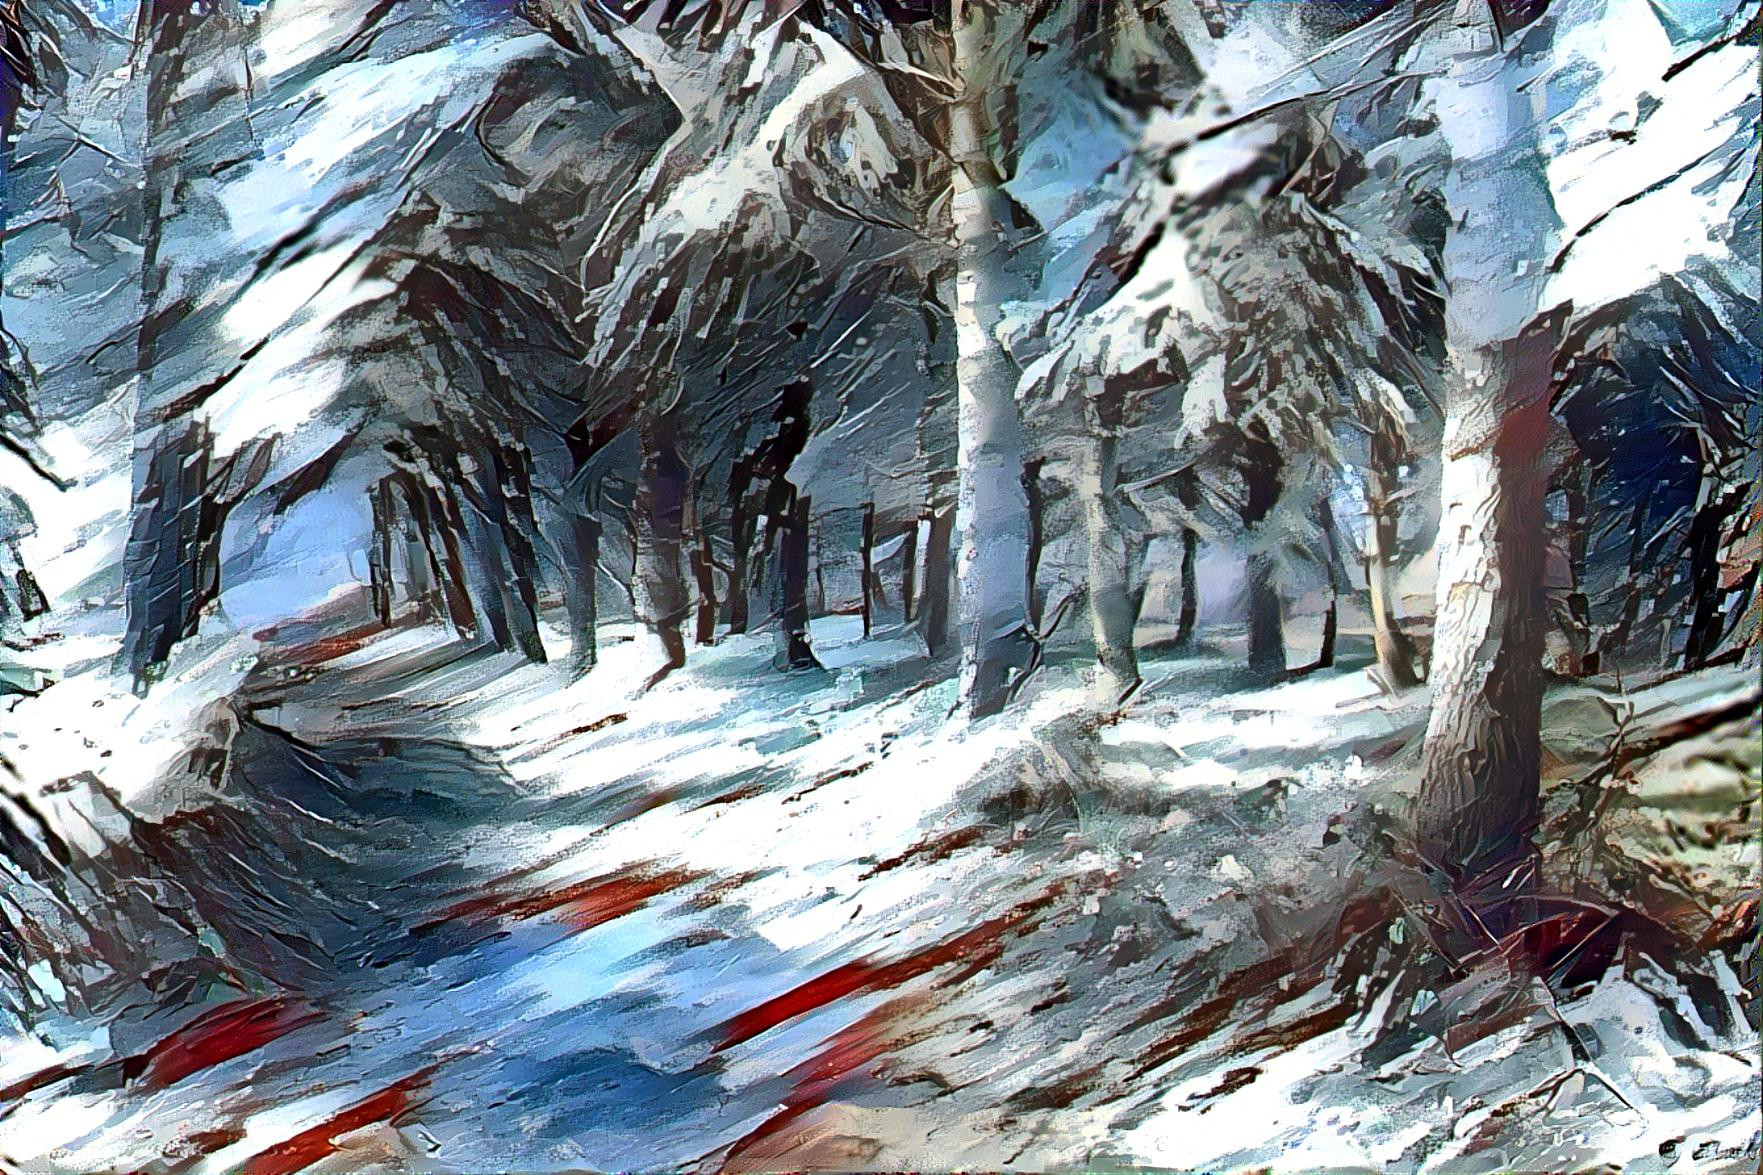 Winter in the Woods